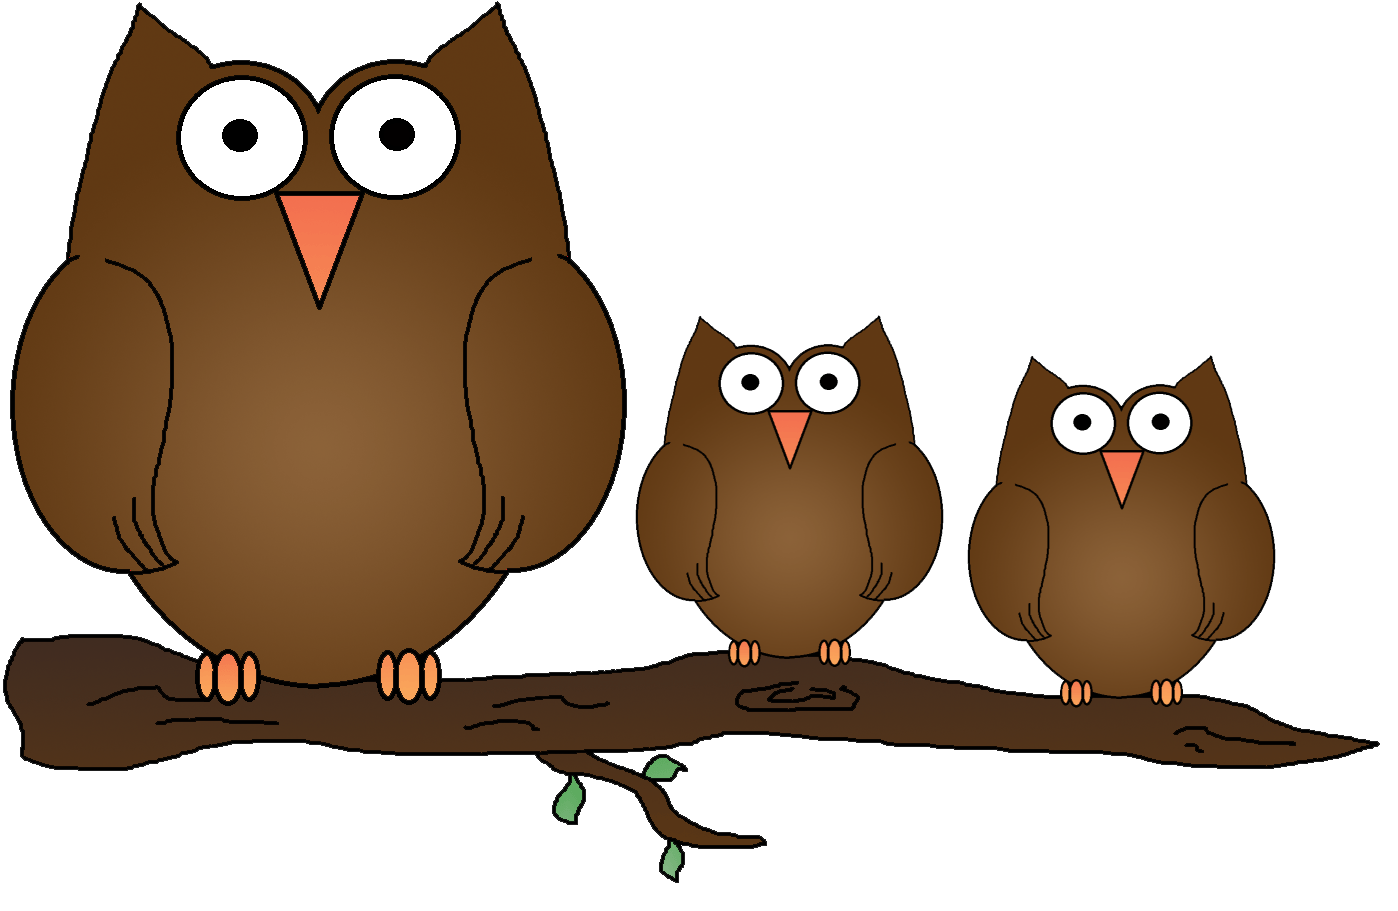 Owl clipart image wise old owl cartoon owl on a tree branch